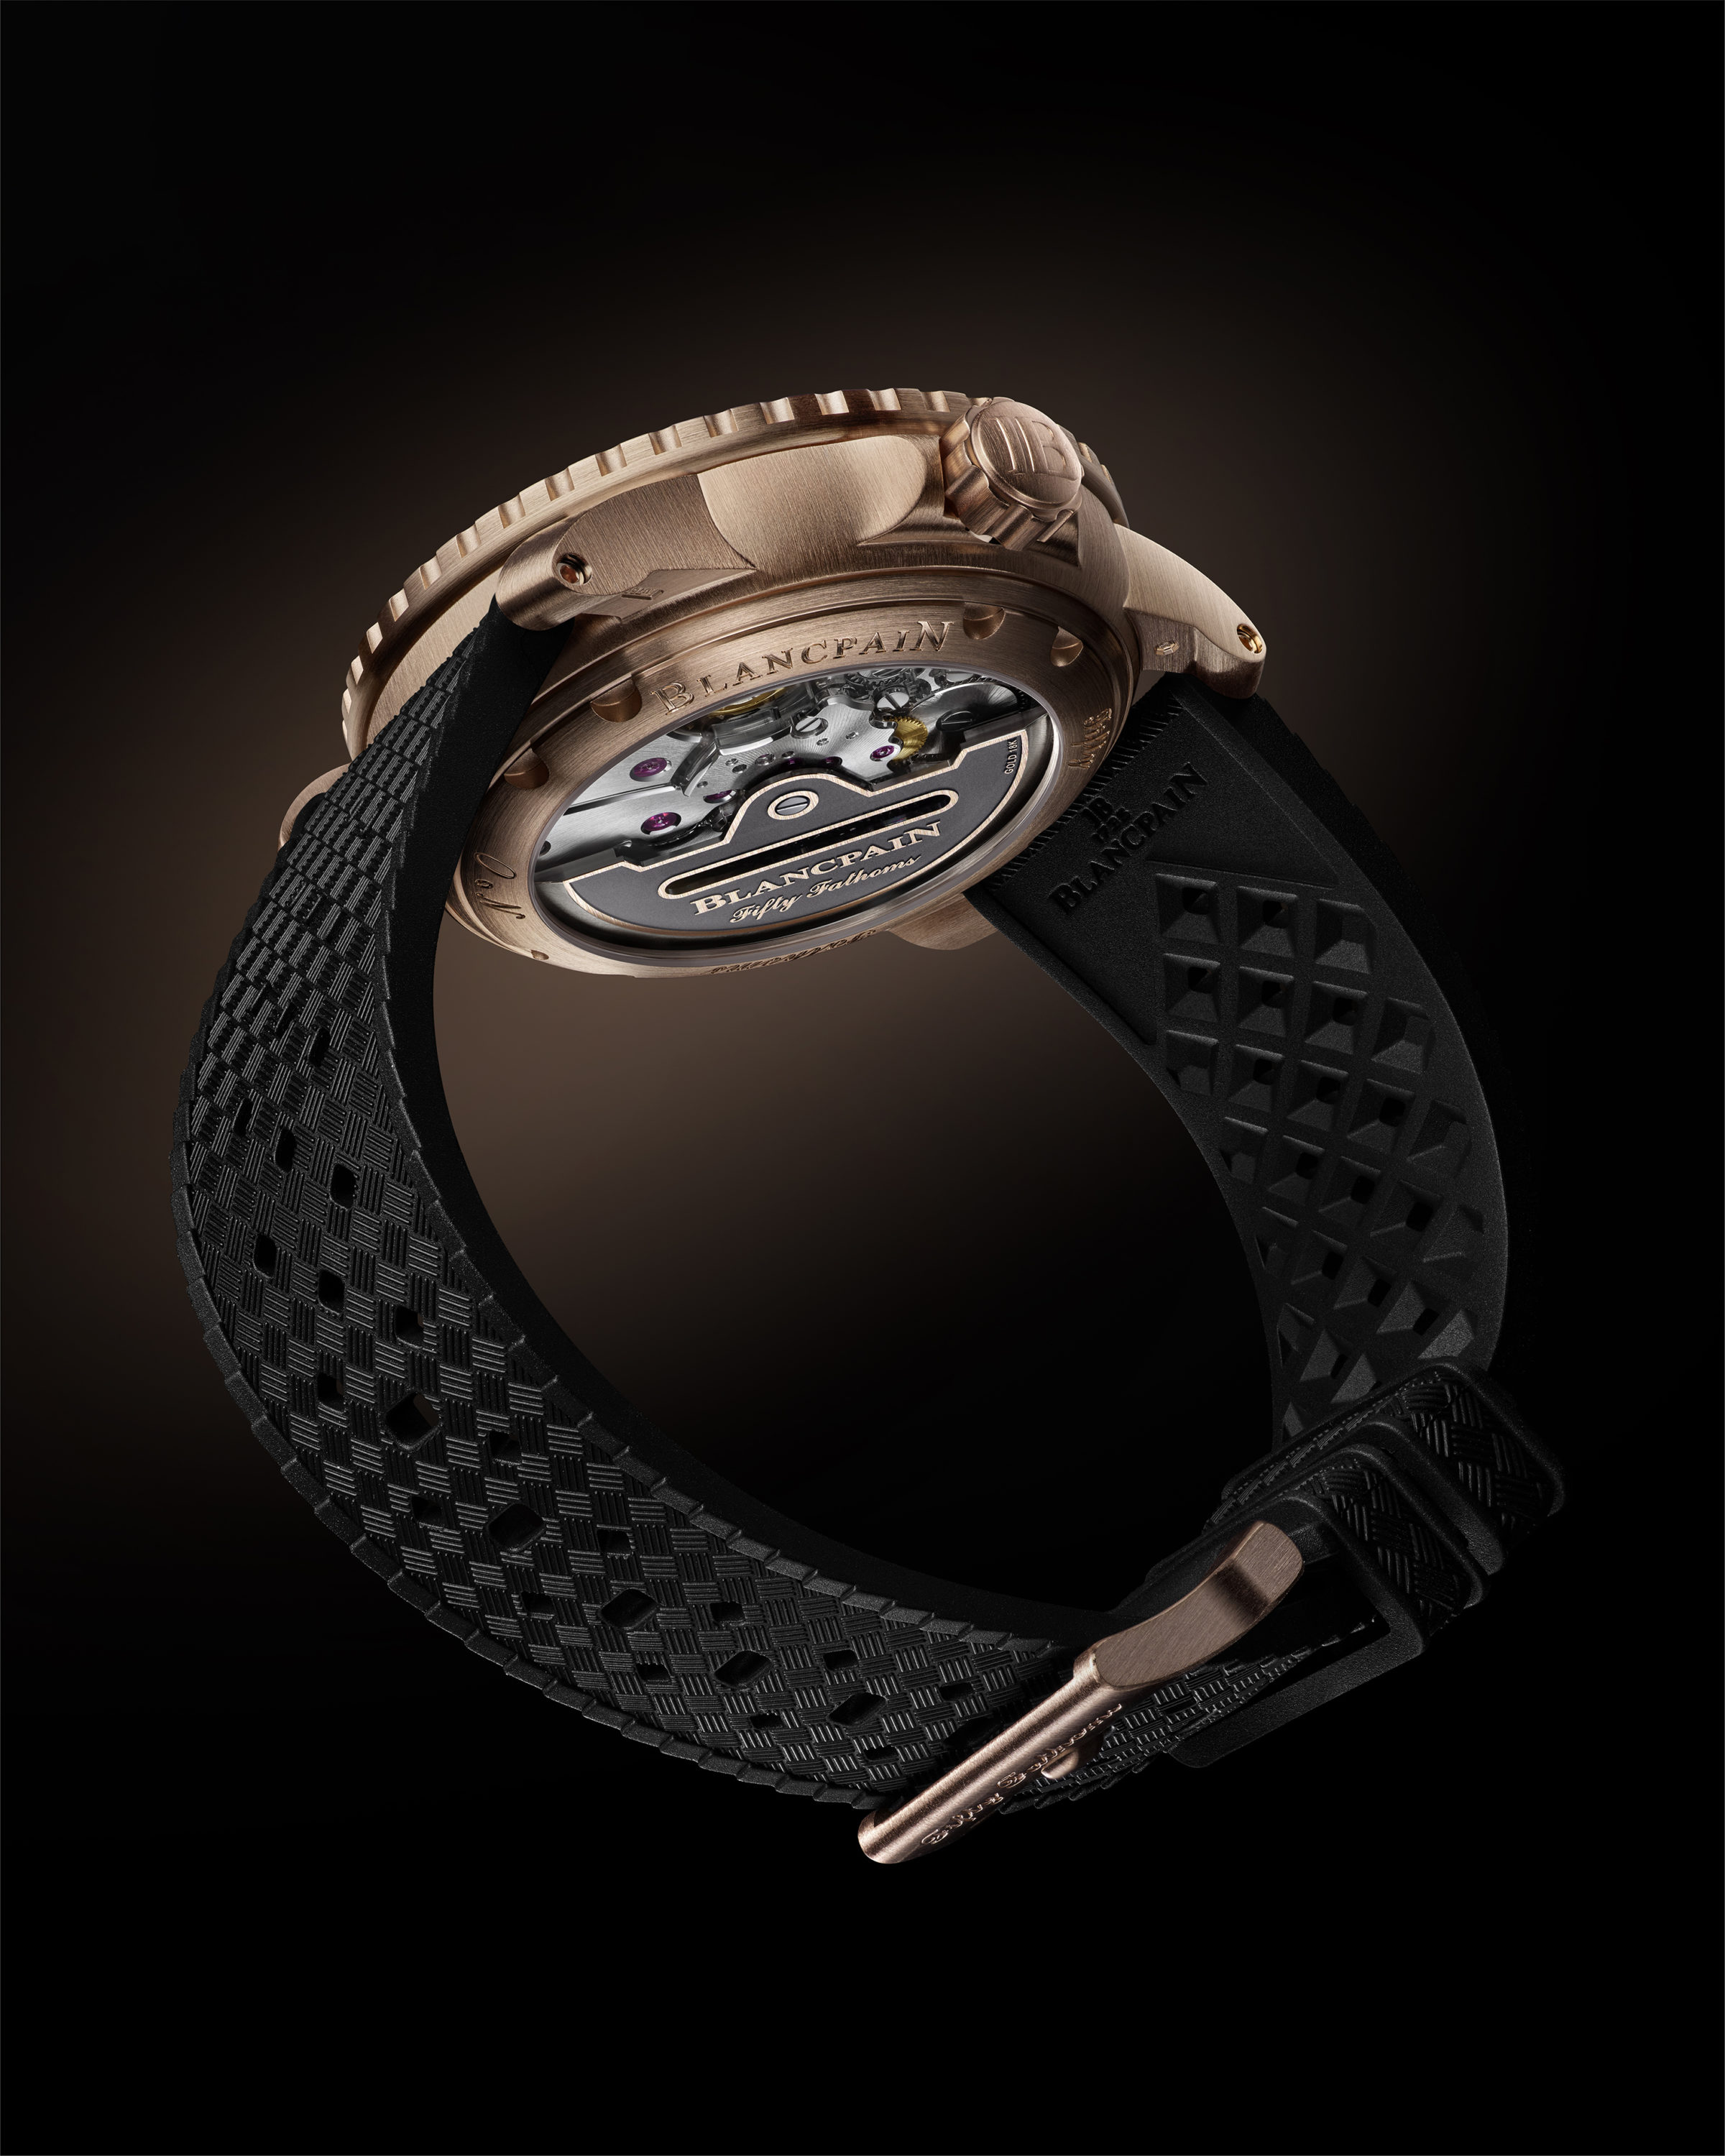 Blancpain: The Fifty Fathoms in 42 mm is Here